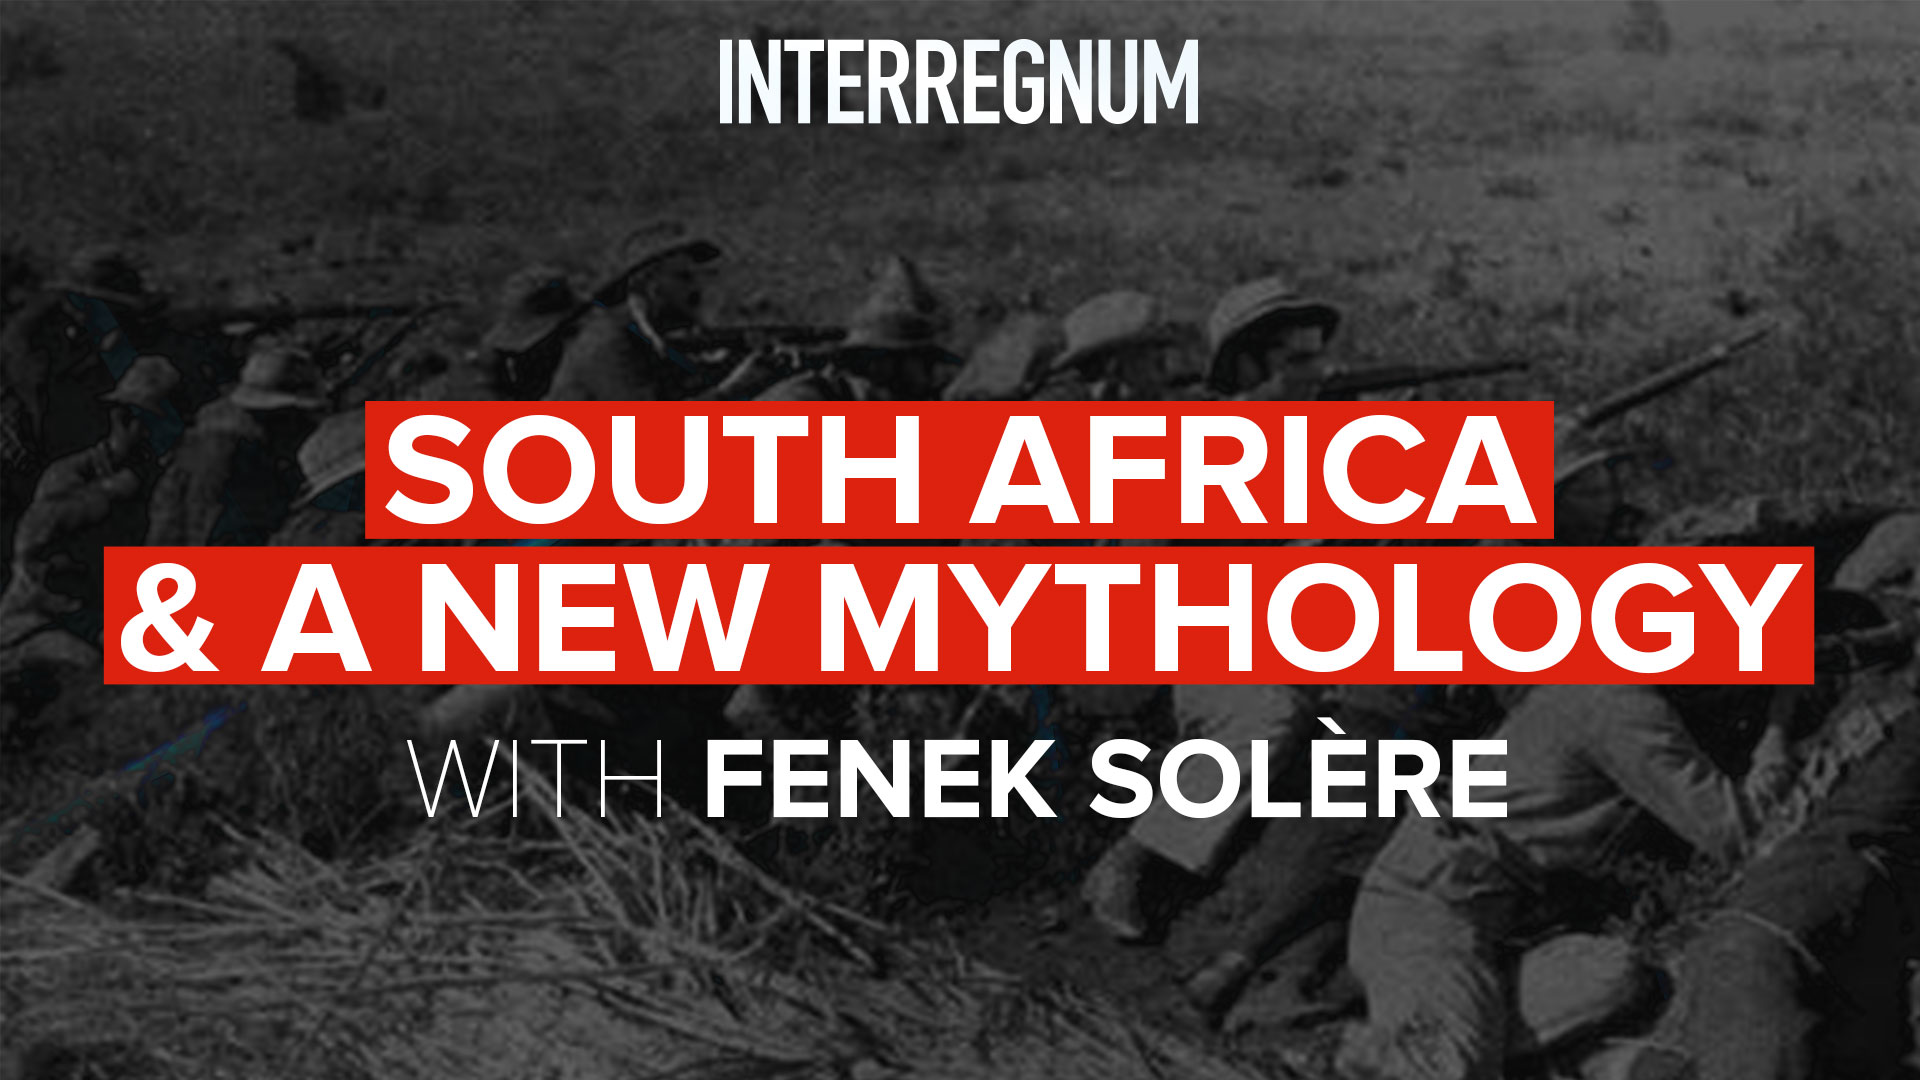 South Africa and a New Mythology with Fenek Solère